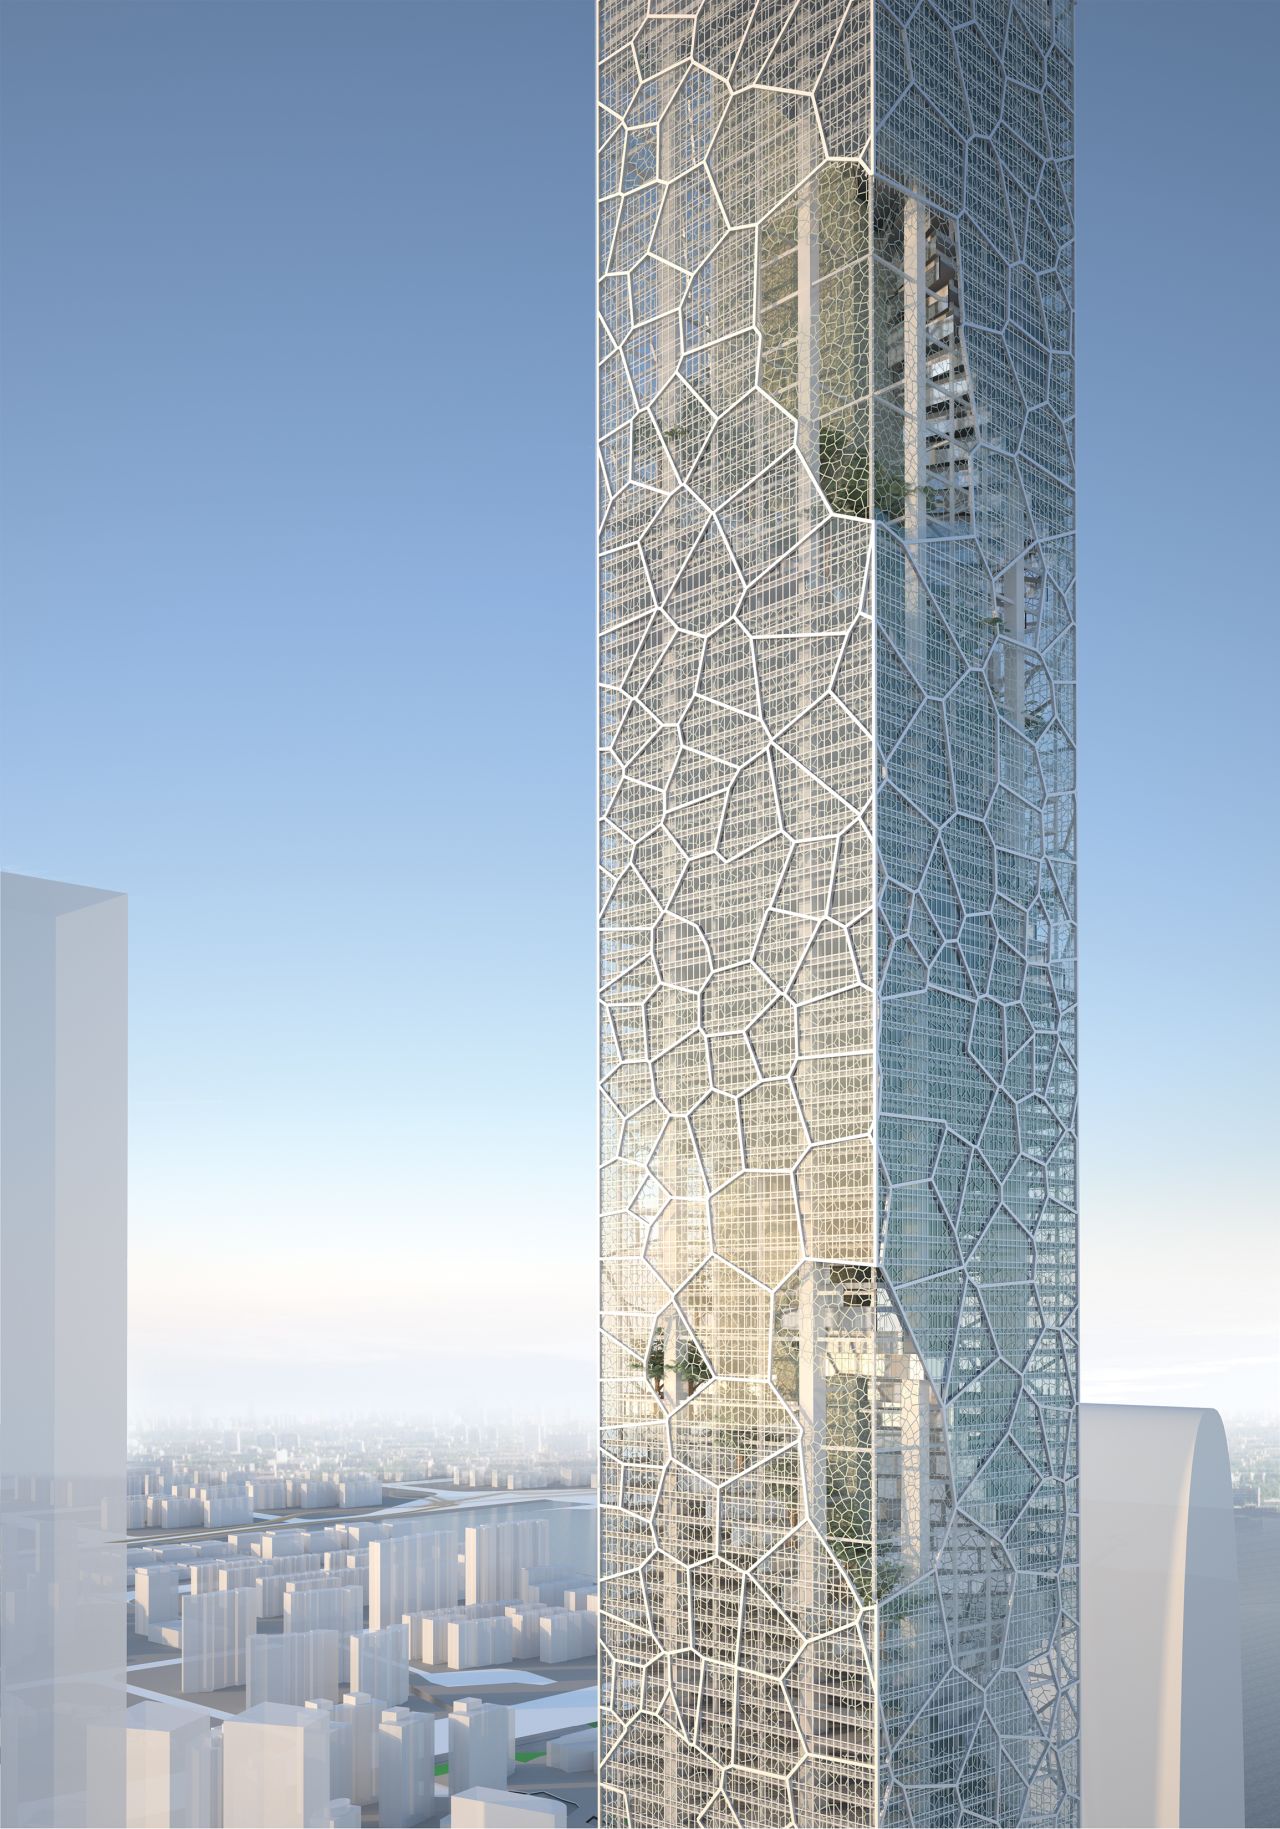 A rendering of a section of facade of the Biophilic Tower, a 668m skyscraper proposed for Suzhou, China in 2012. The design featured many elements inspired by shapes found in the natural world, and incorporate flora into its interiors.